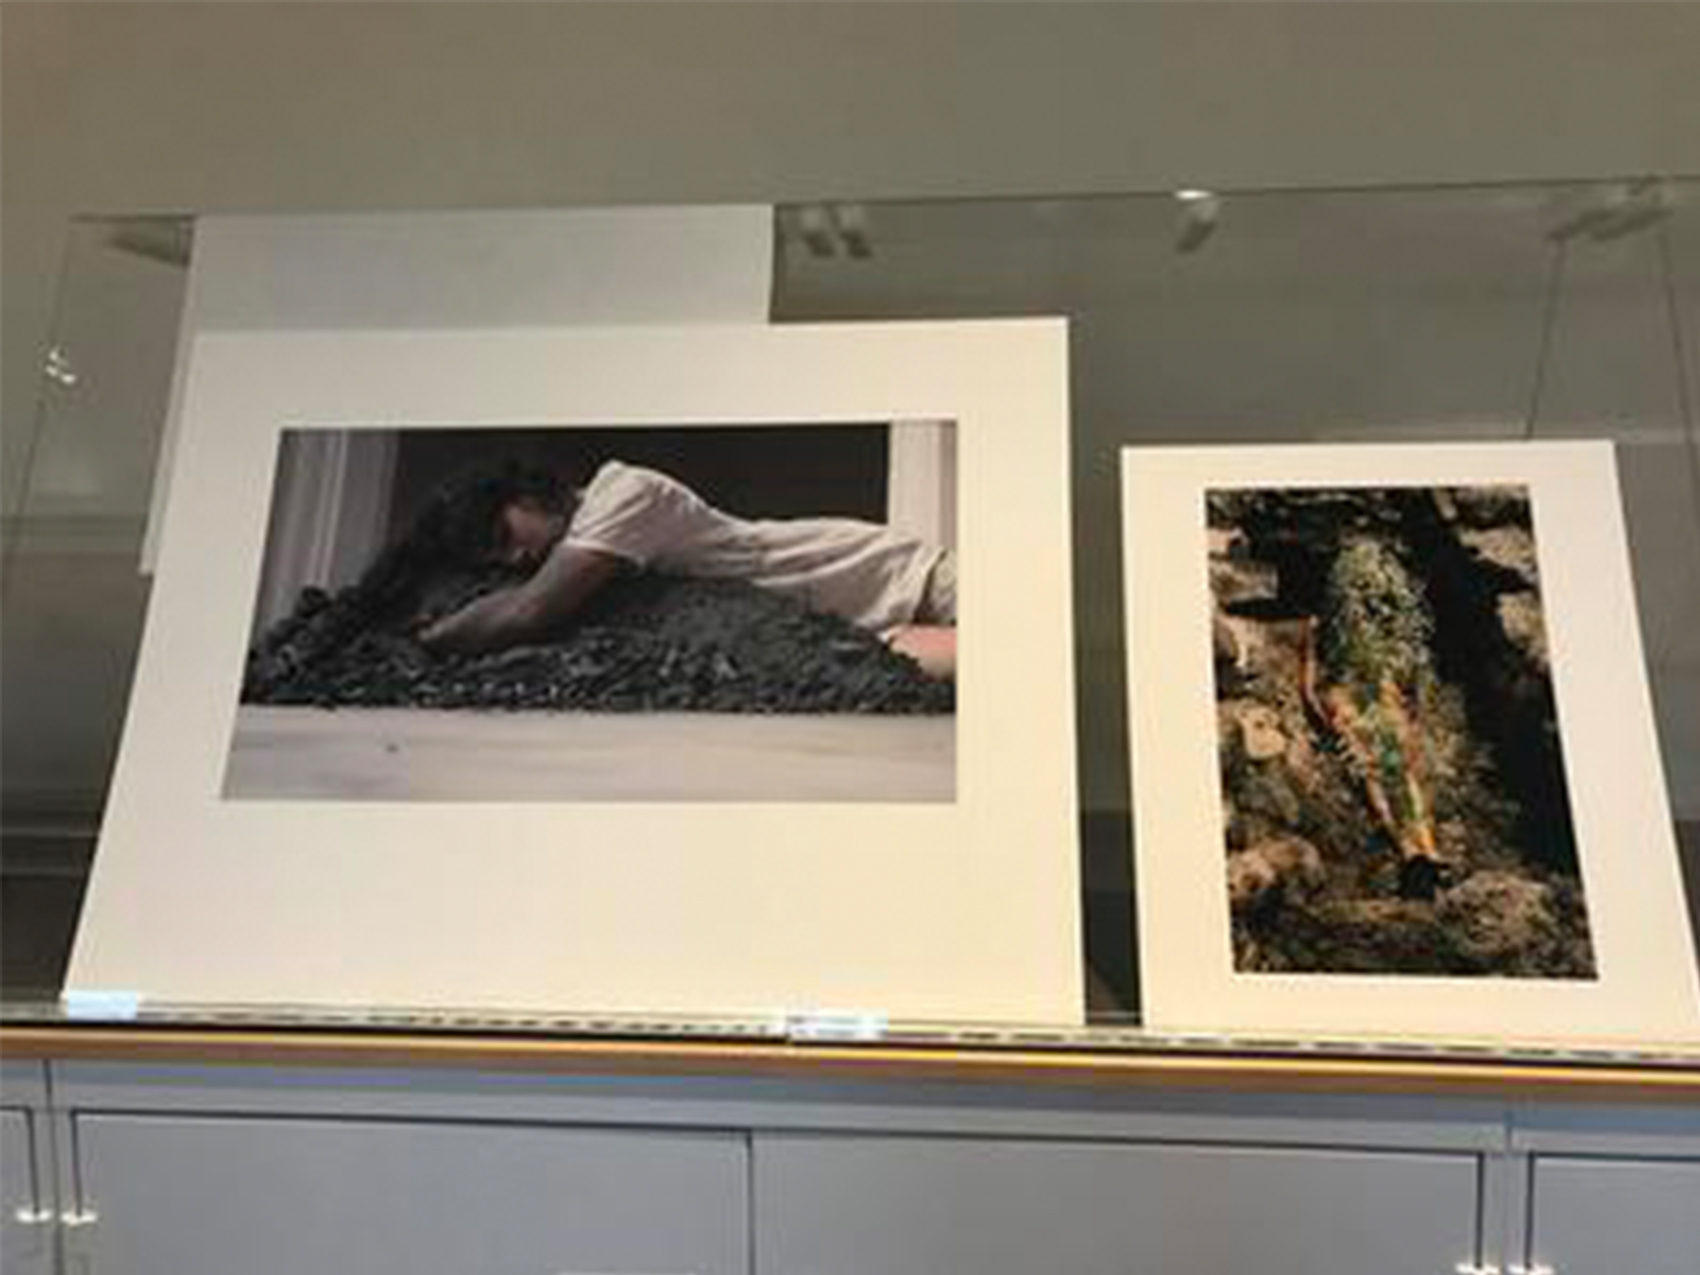 two prints propped up side by side, one of a woman lying in a pile of coal and one of a woman buried under leaves